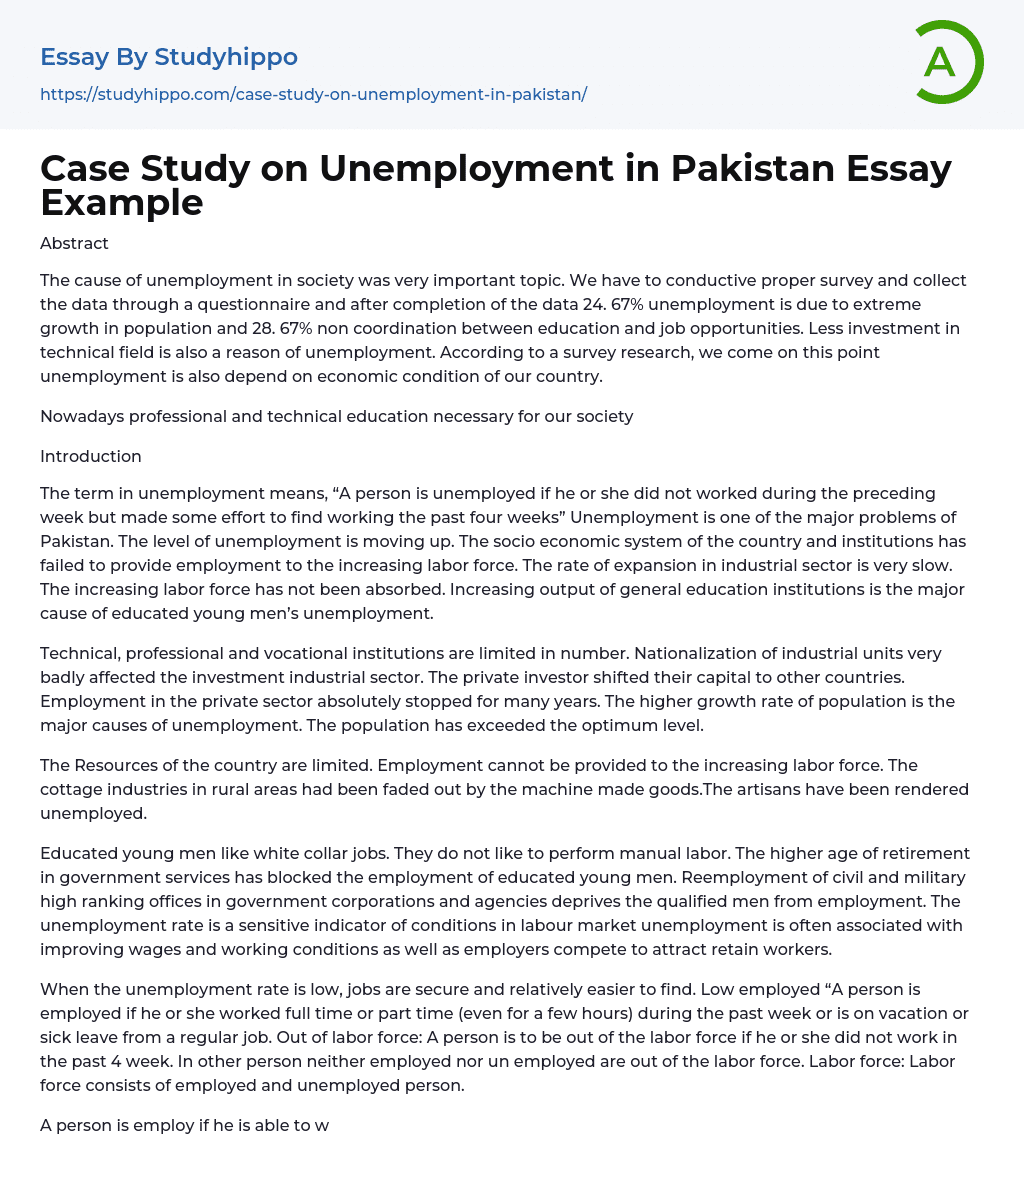 Case Study on Unemployment in Pakistan Essay Example